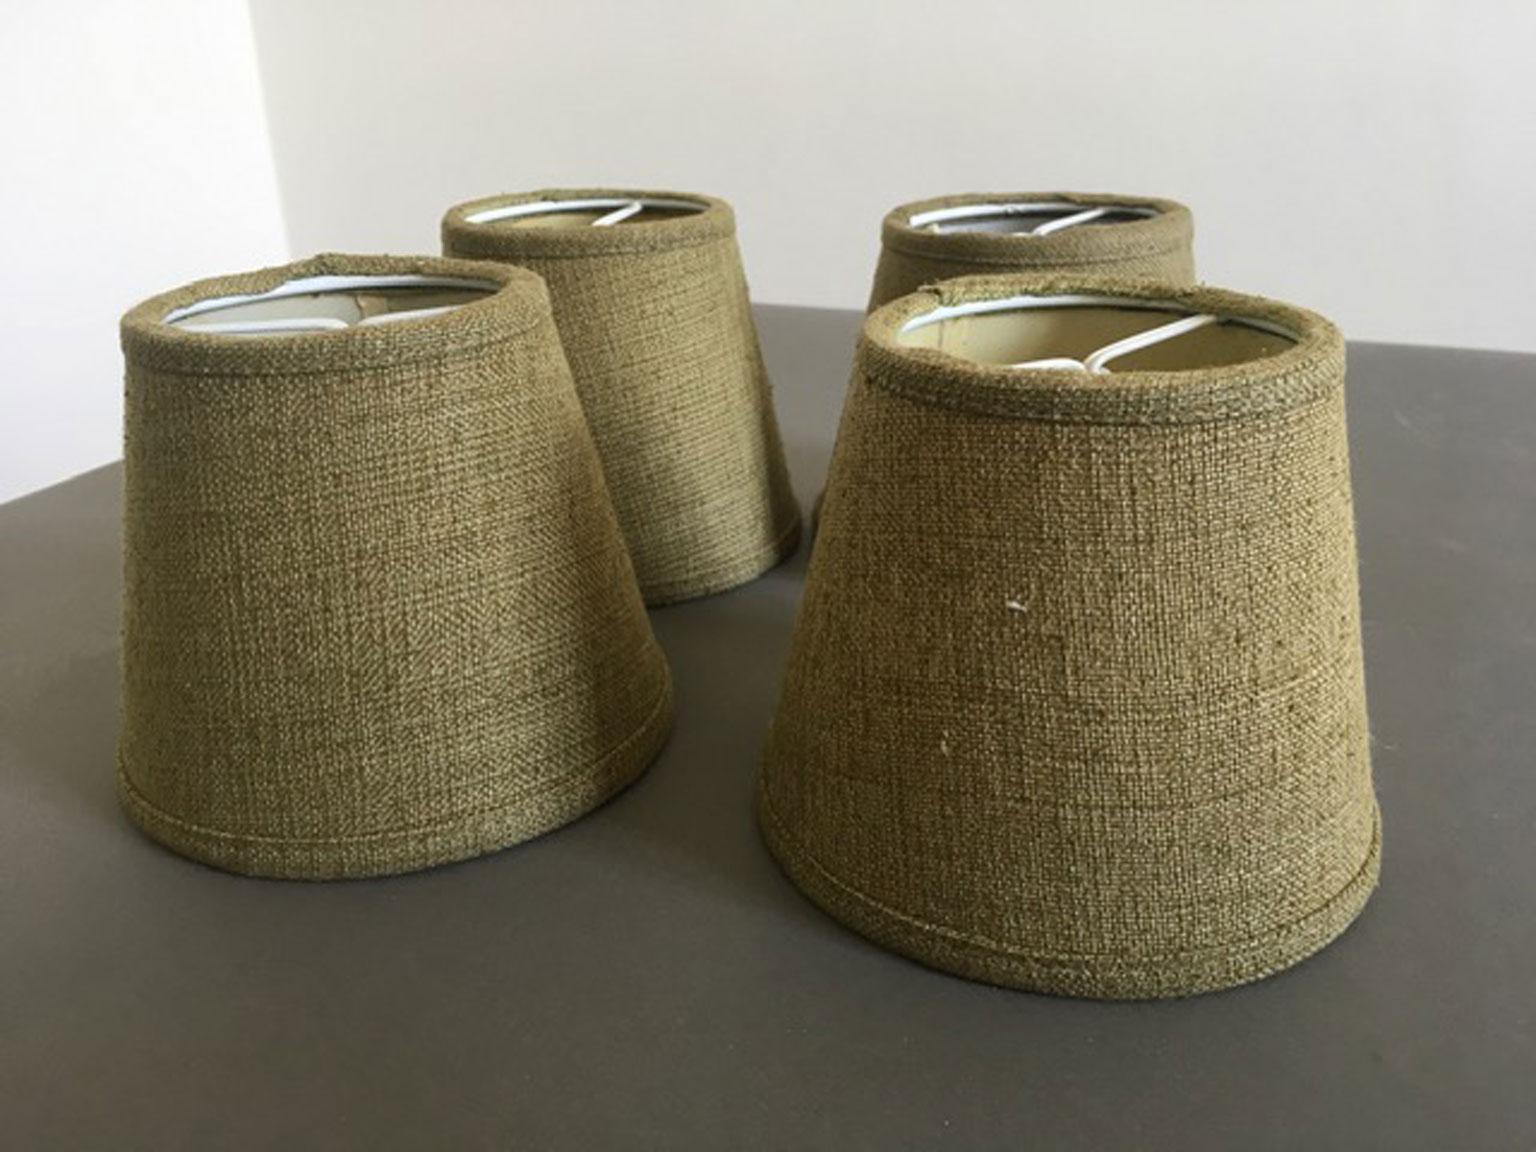 Set four linen lampshades in green olive color.
Suitable for Baccarat wall light model Torch.
Free shipping in EU and the rest of the world.